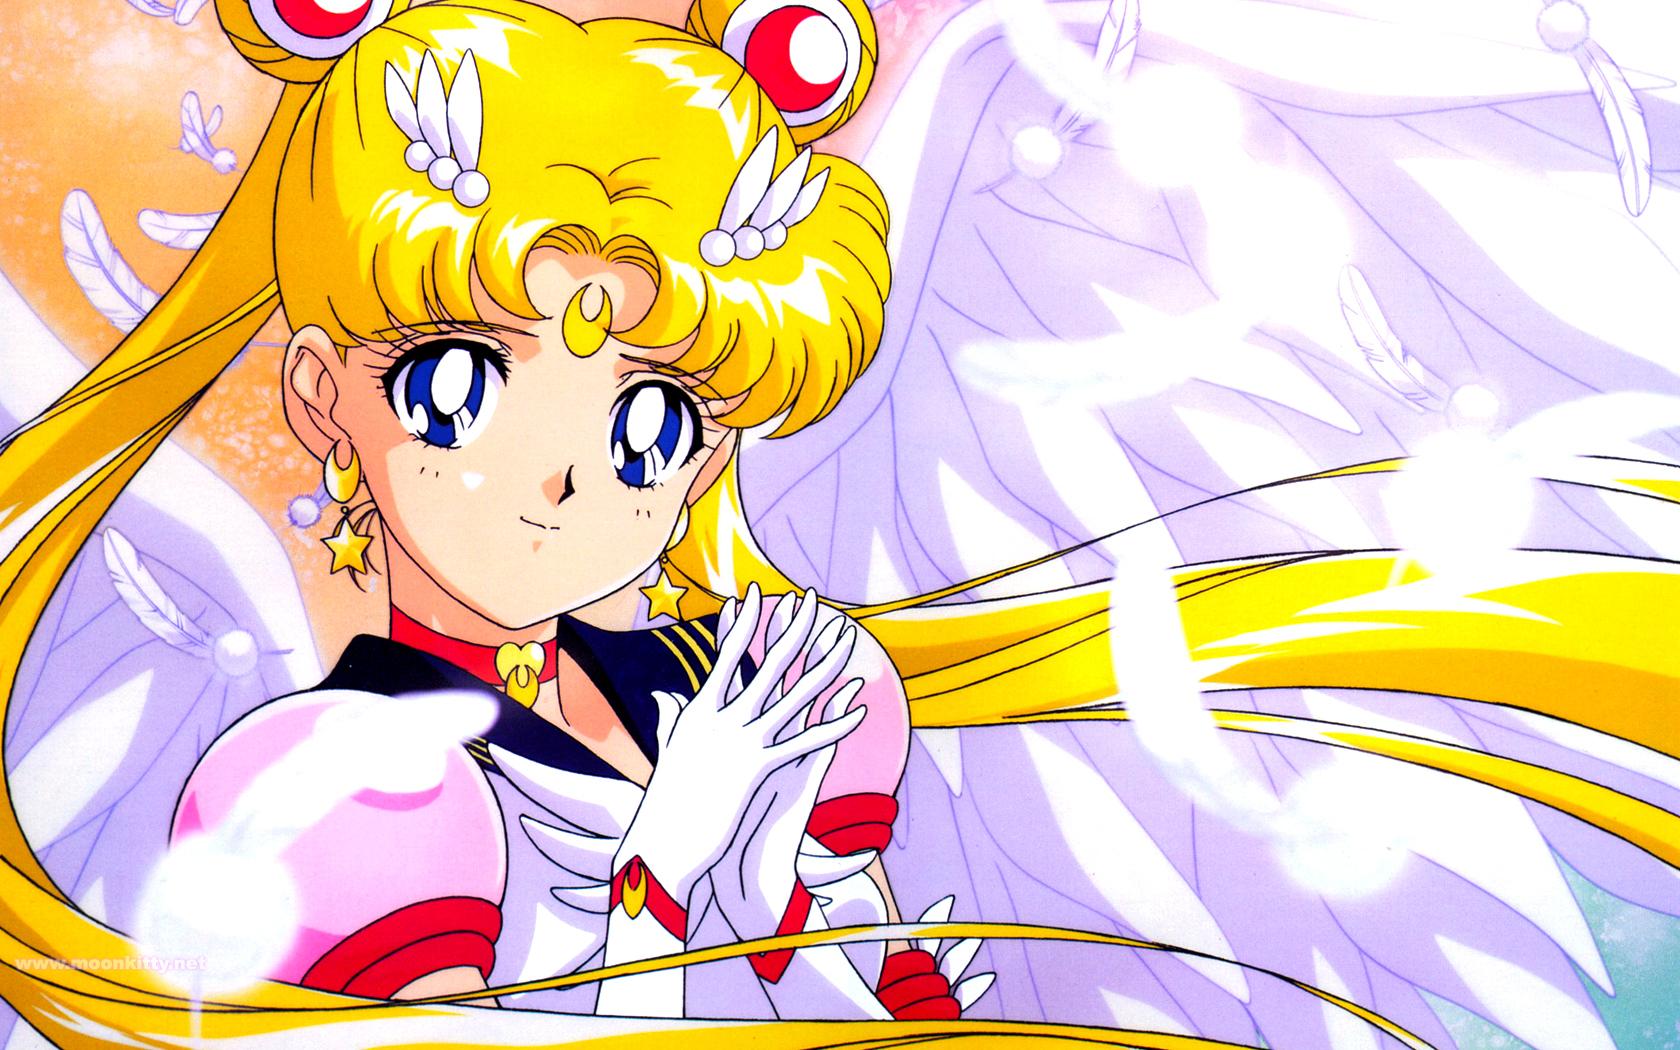 1680 x 1050 · jpeg - moonkitty: Sailor Moon Wallpapers Widescreen Page 9